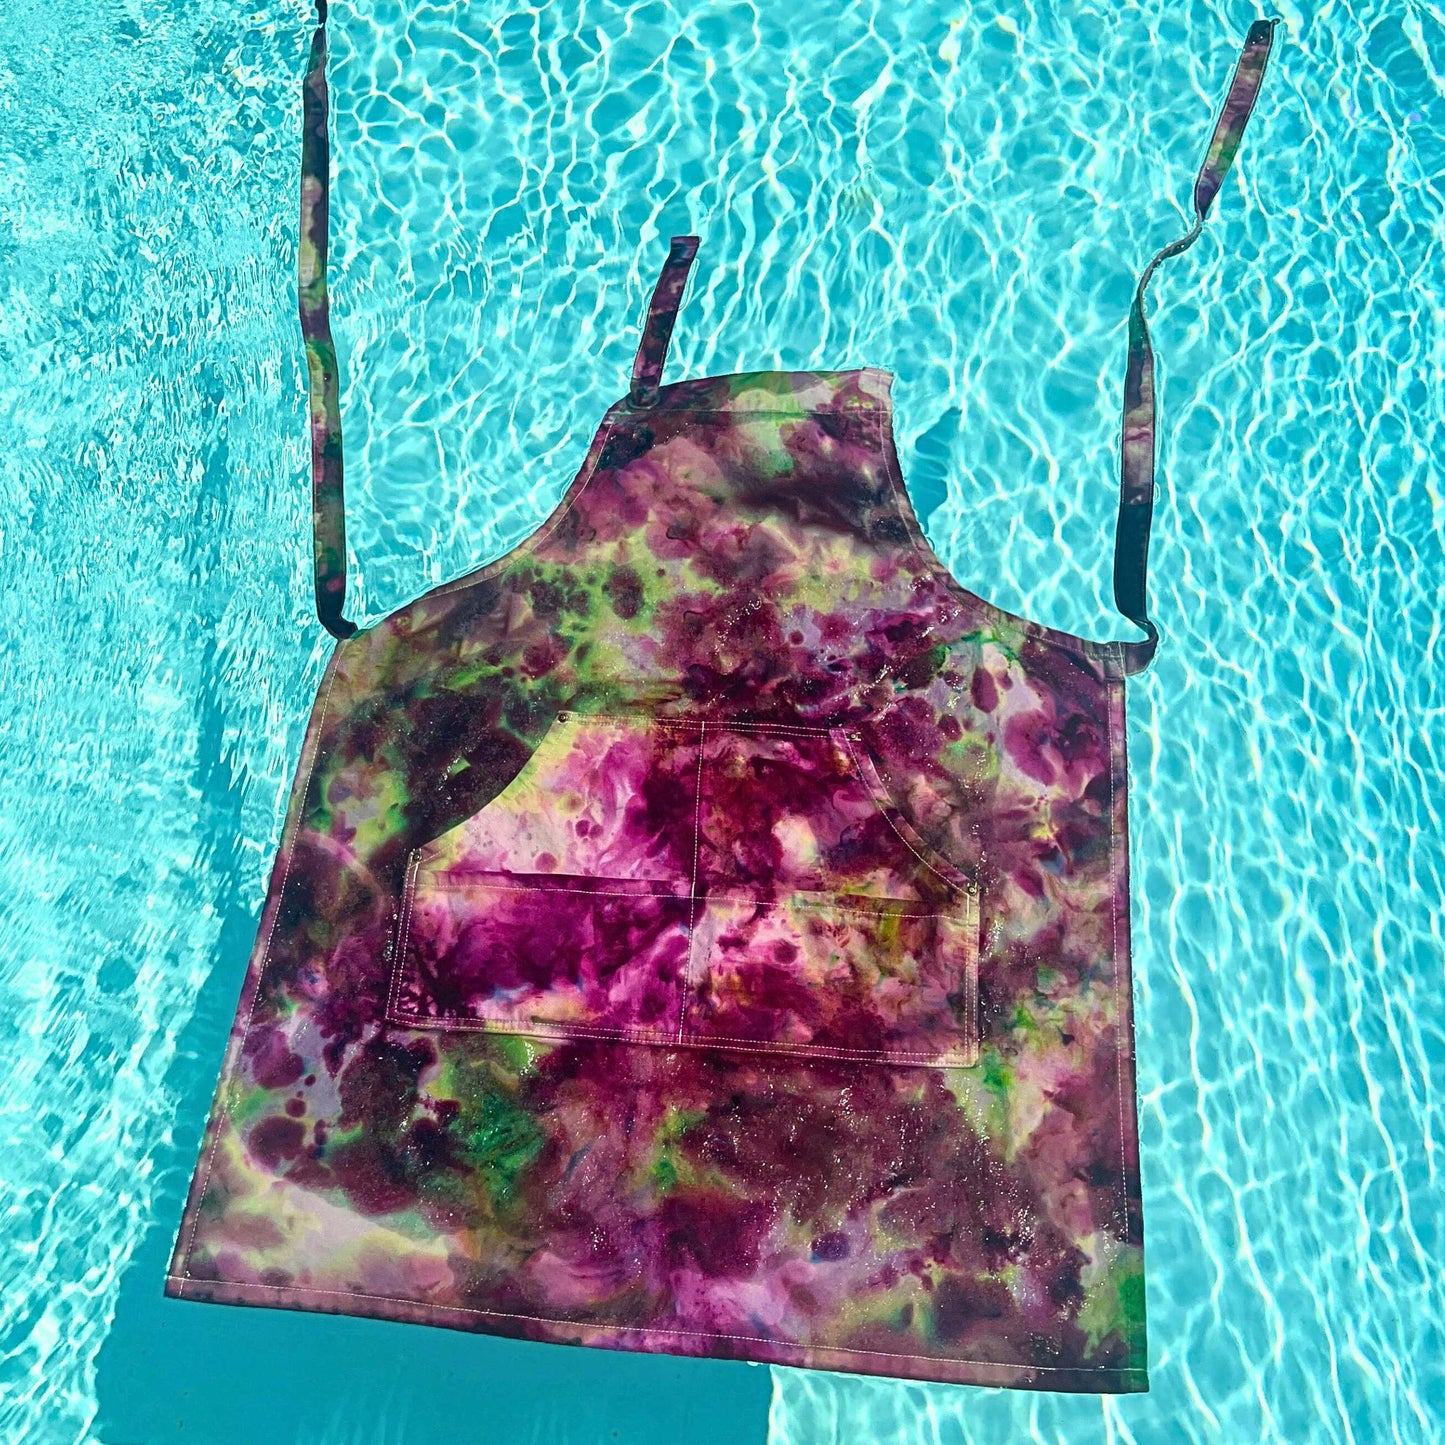 Colorful Tie-Dye Apron in Sturdy Cotton Canvas